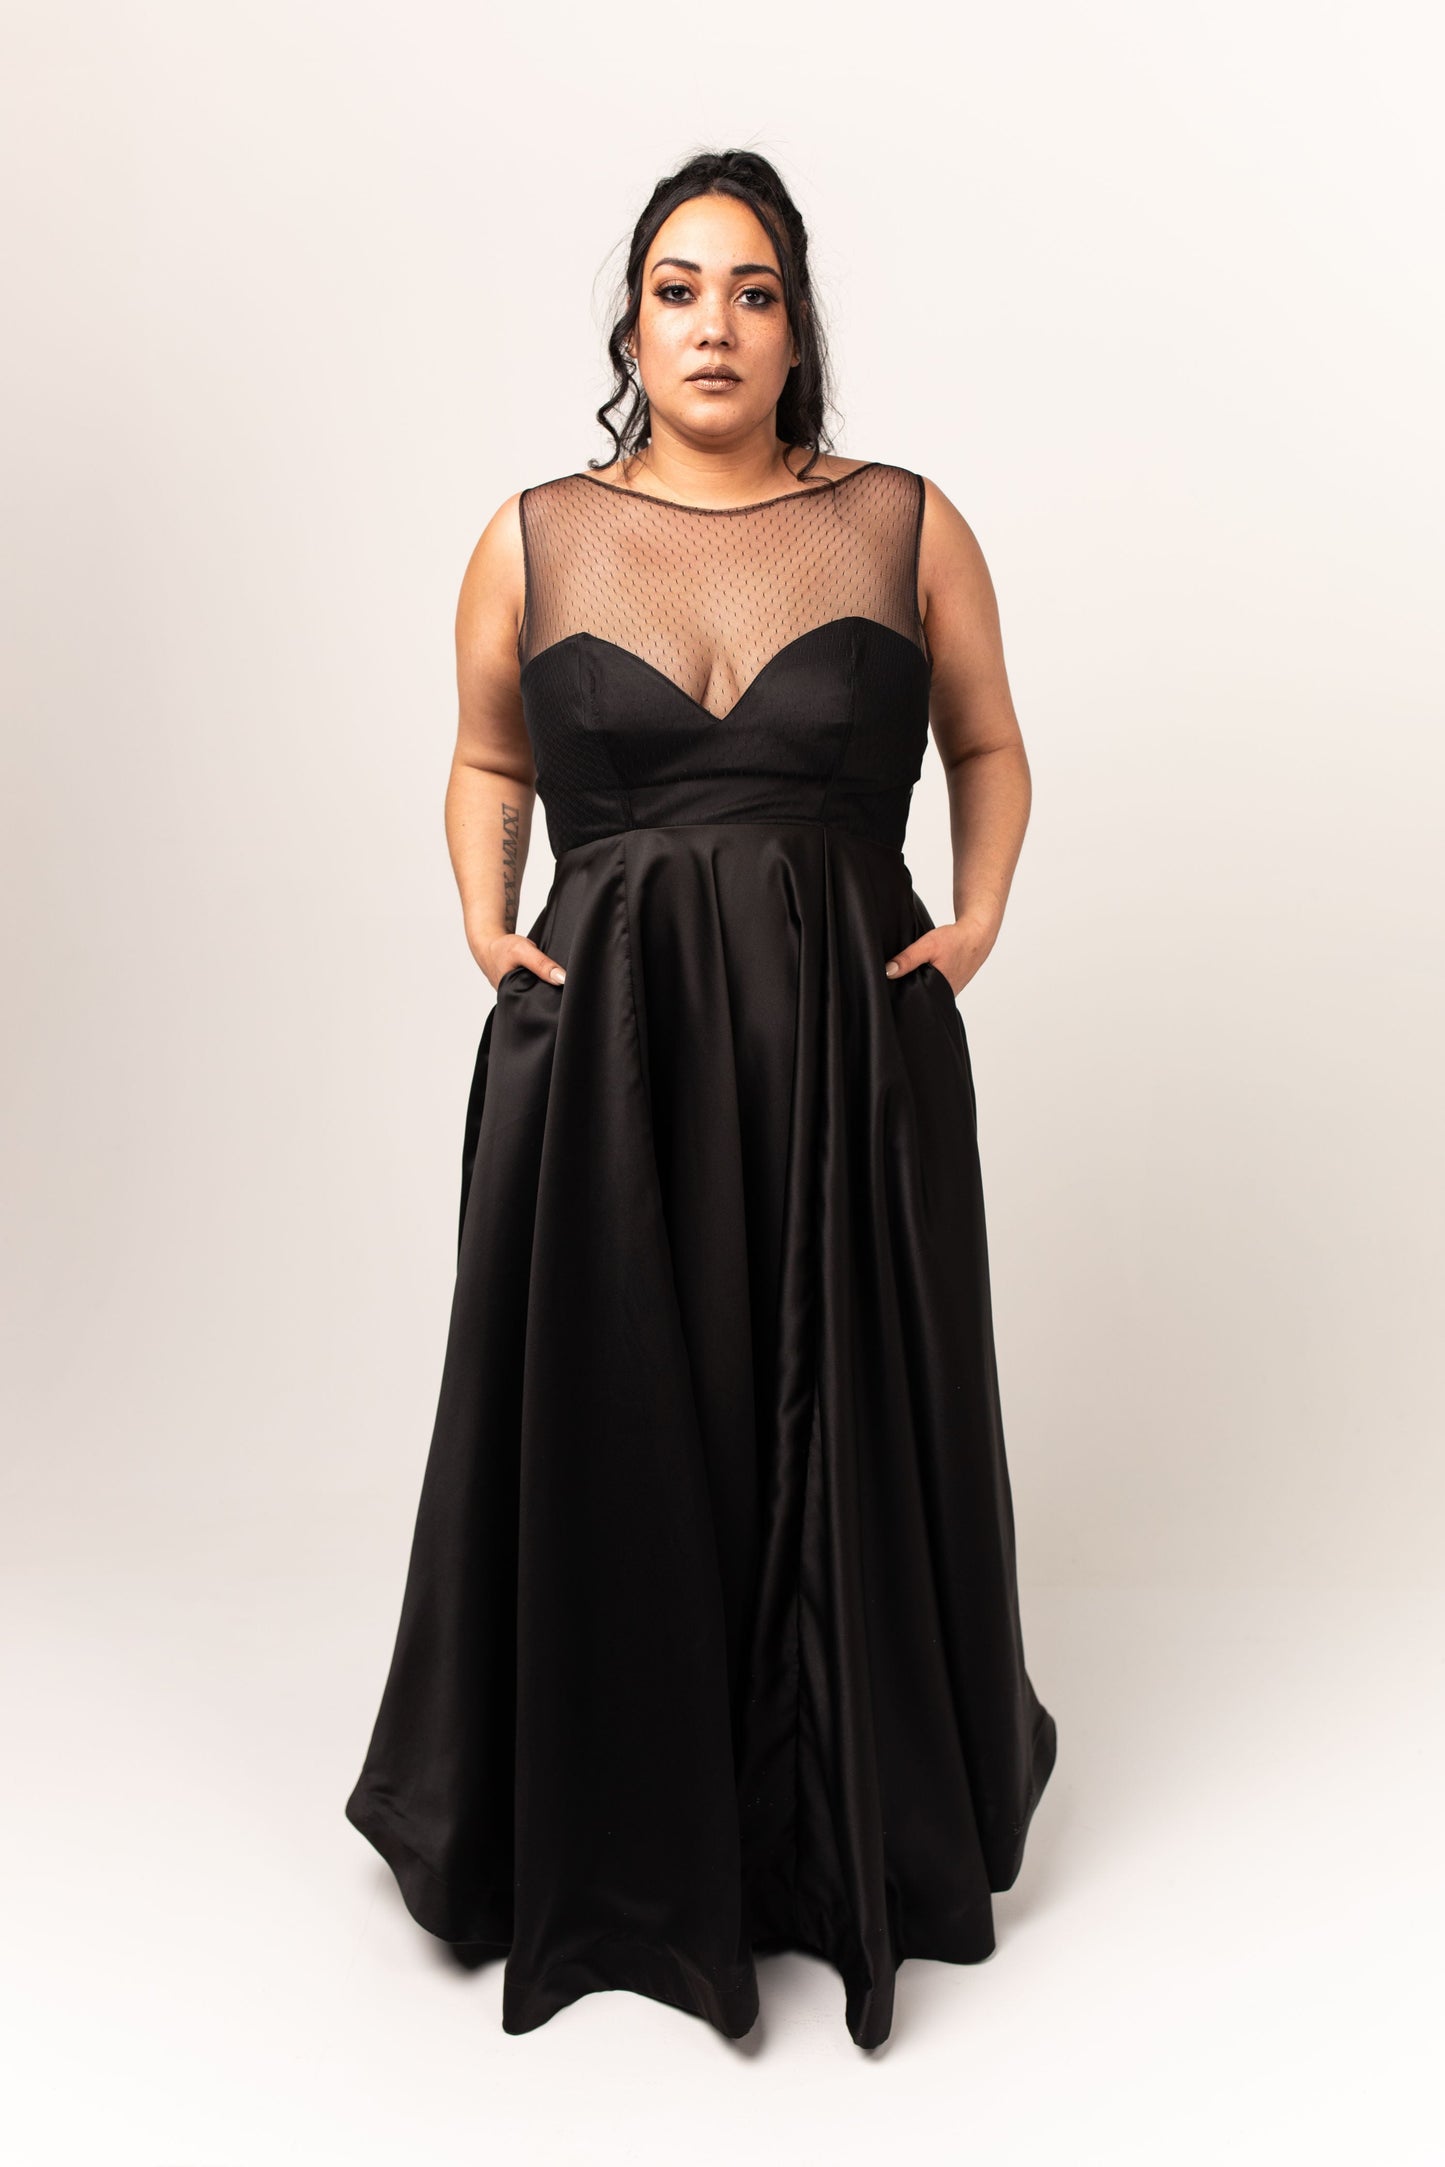 Size 14 Sample - Adelaide Gown